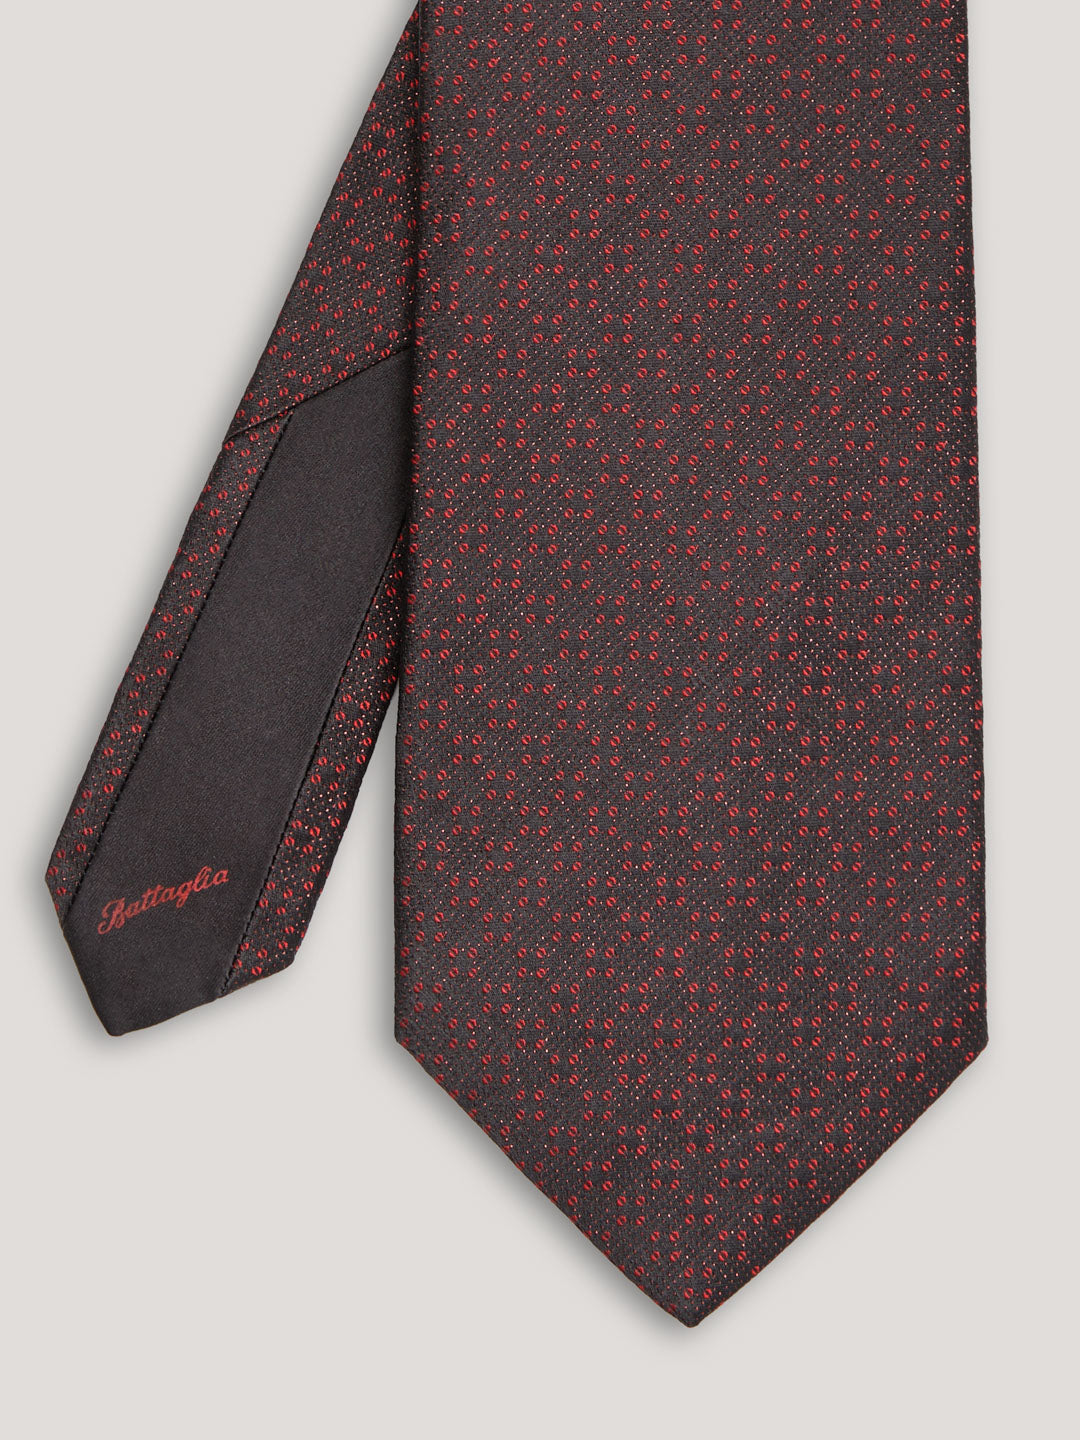 Red and black tie with small pattern. 